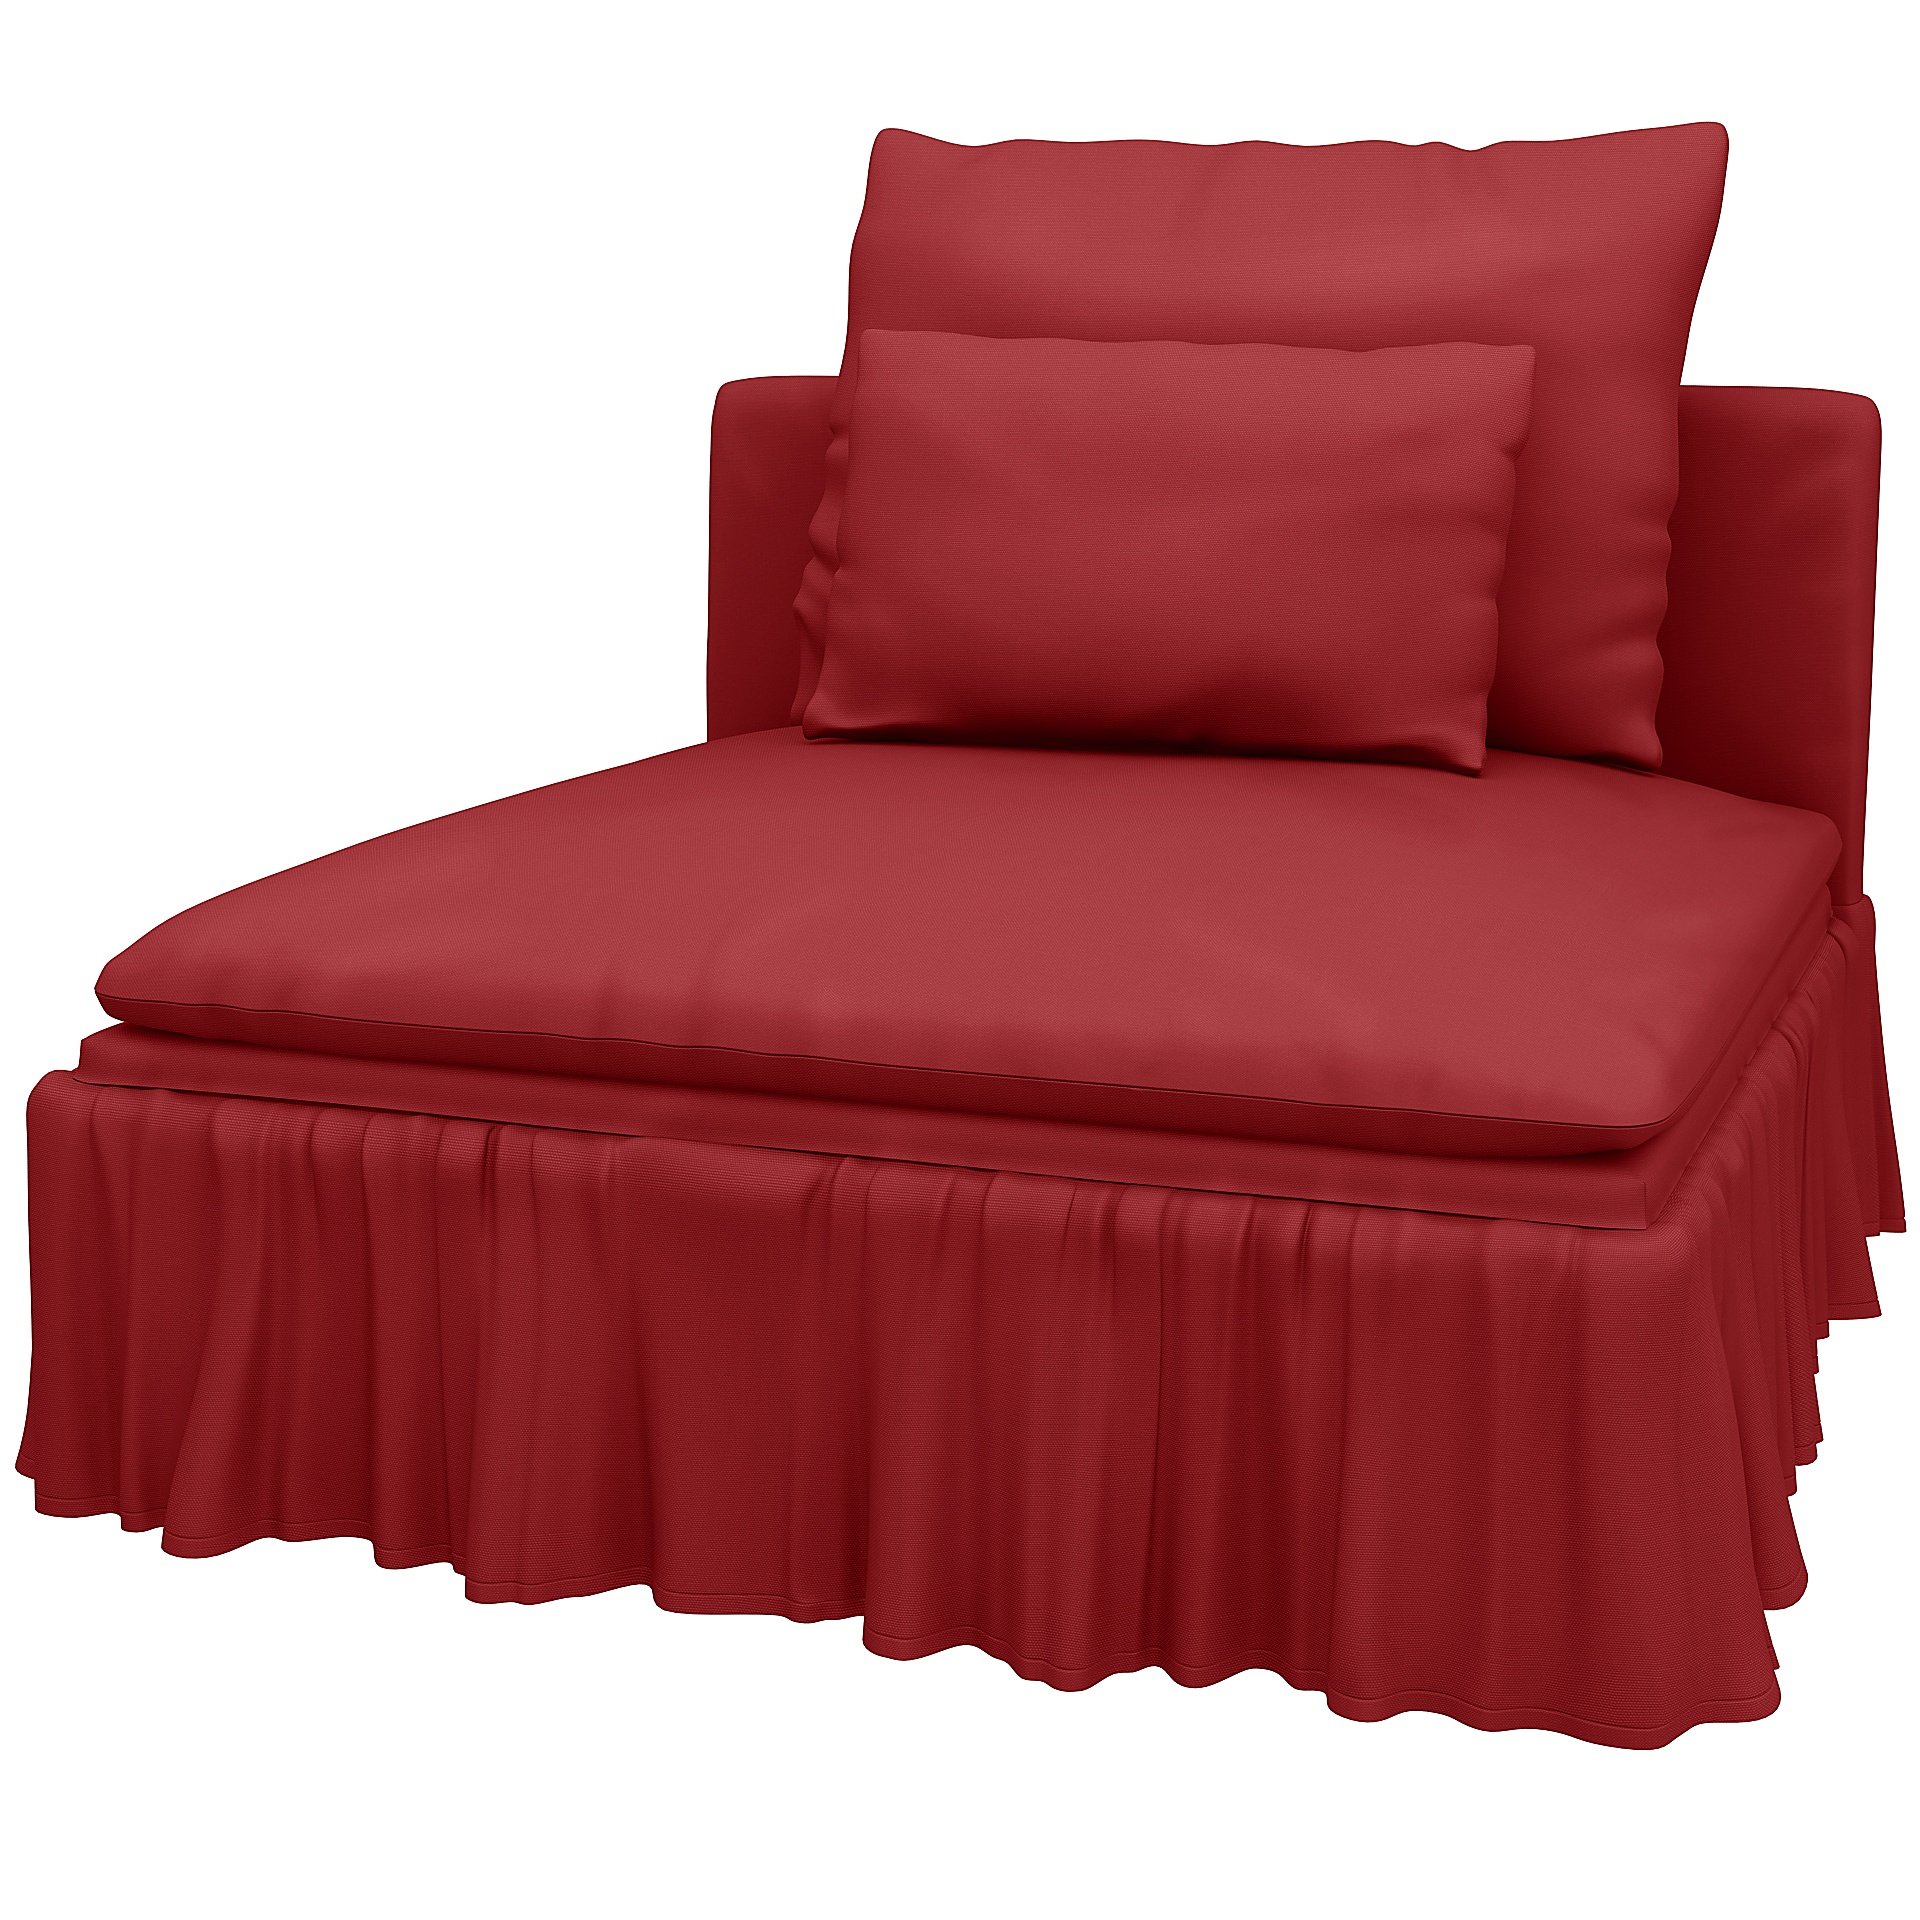 IKEA - Soderhamn 1 seat section cover Maximalist Fit, Scarlet Red, Cotton - Bemz